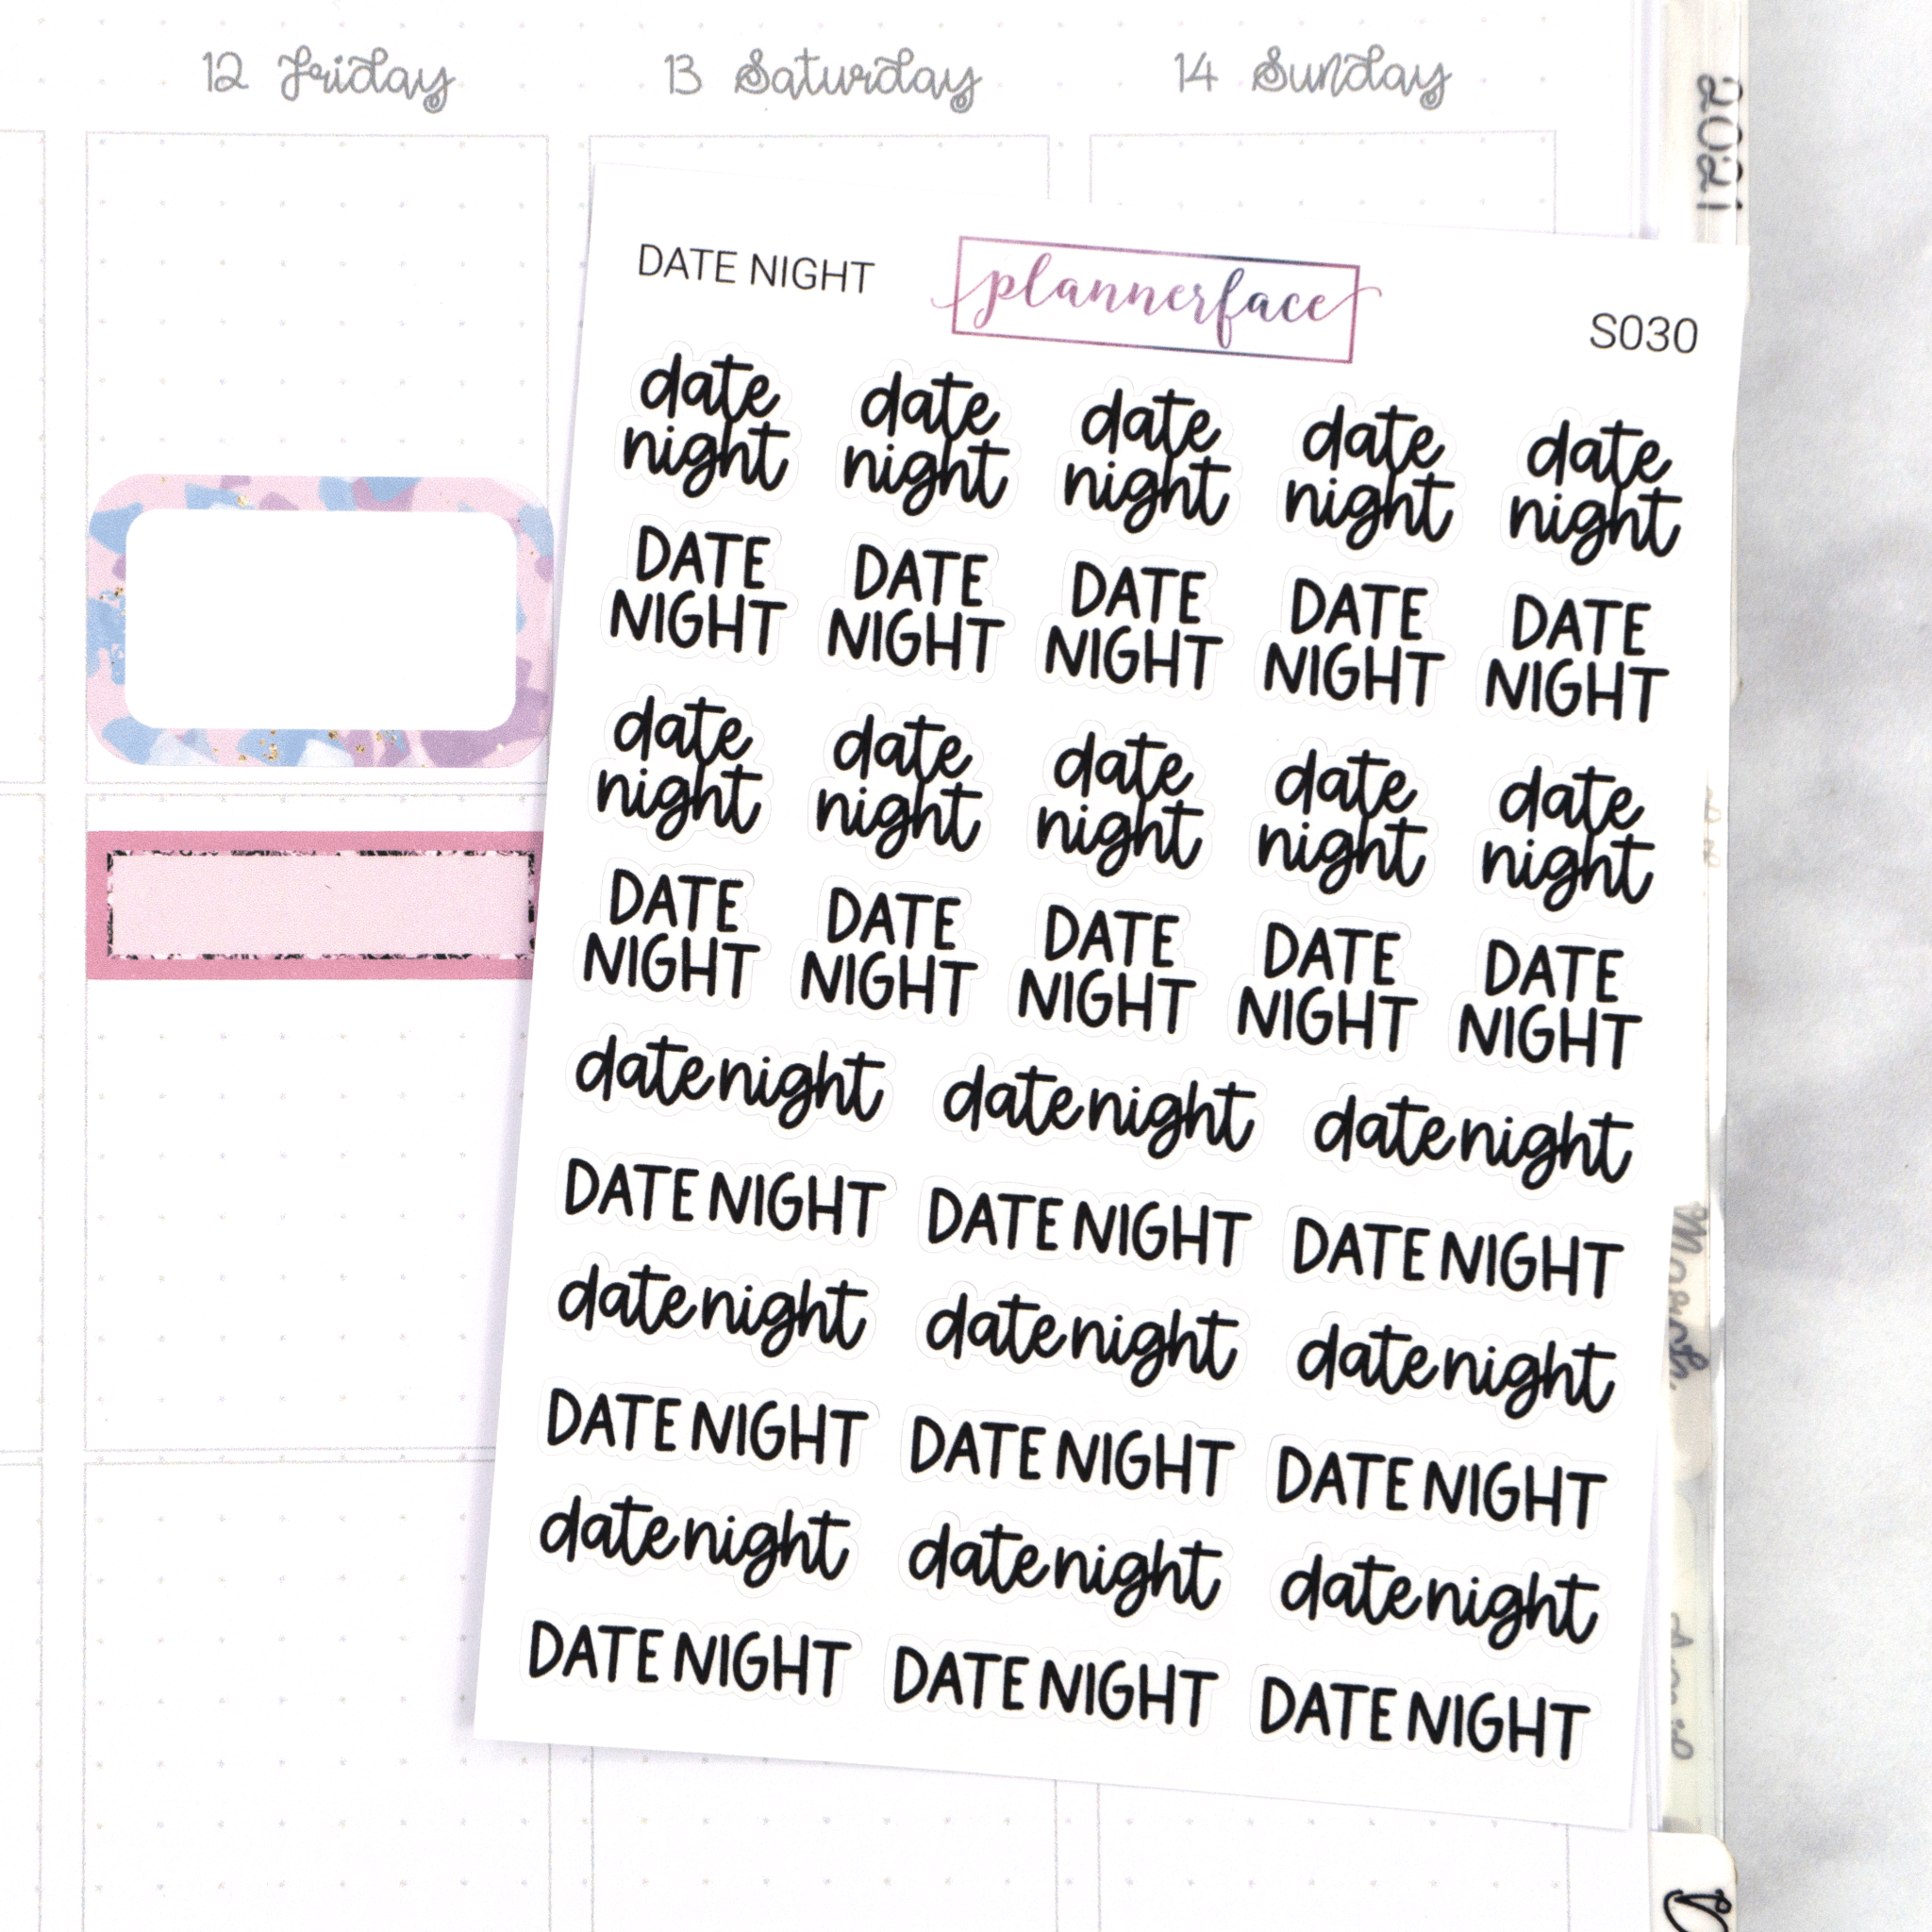 Date Night | Scripts by Plannerface